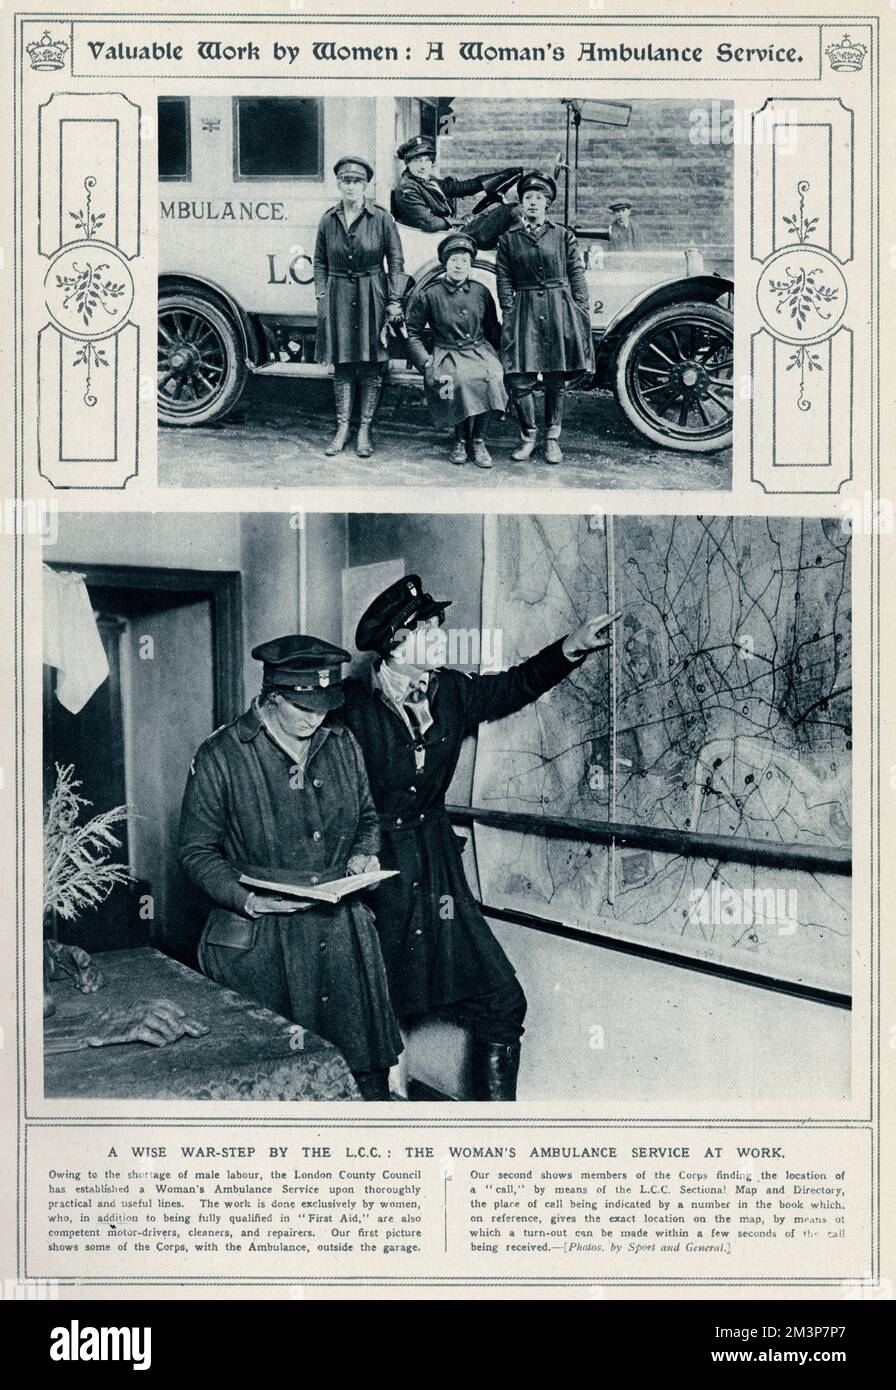 Owing to the shorage of male labour, the London County Council established a Women's ambulance service, quailfied in first aid and competent motor drivers.  Top photograph:  shows some of the Corps, with the ambulance, outside a garage.  Bottom photograph:  members of the Corps finding the location of a call by means of the London County Council sectional map and directory.      Date: 1917 Stock Photo